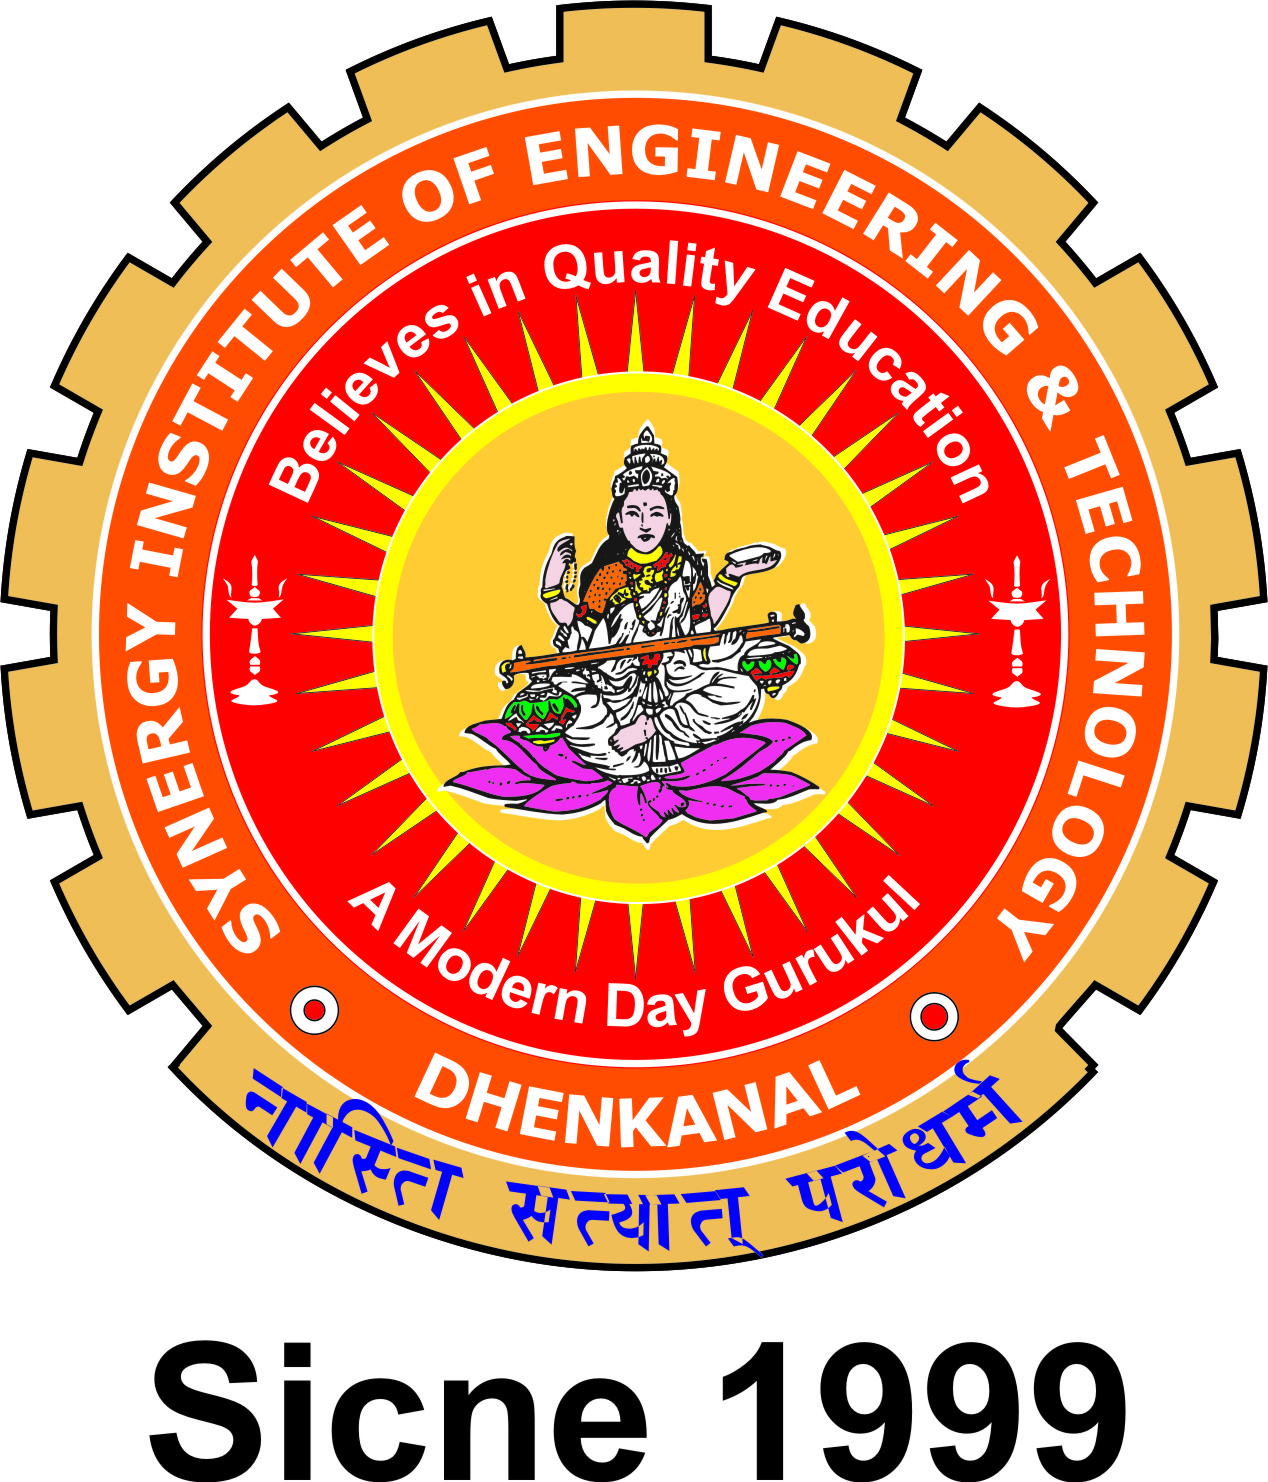 SYNERGYINSTITUTE OF ENGINEERING & TECHNOLOGY